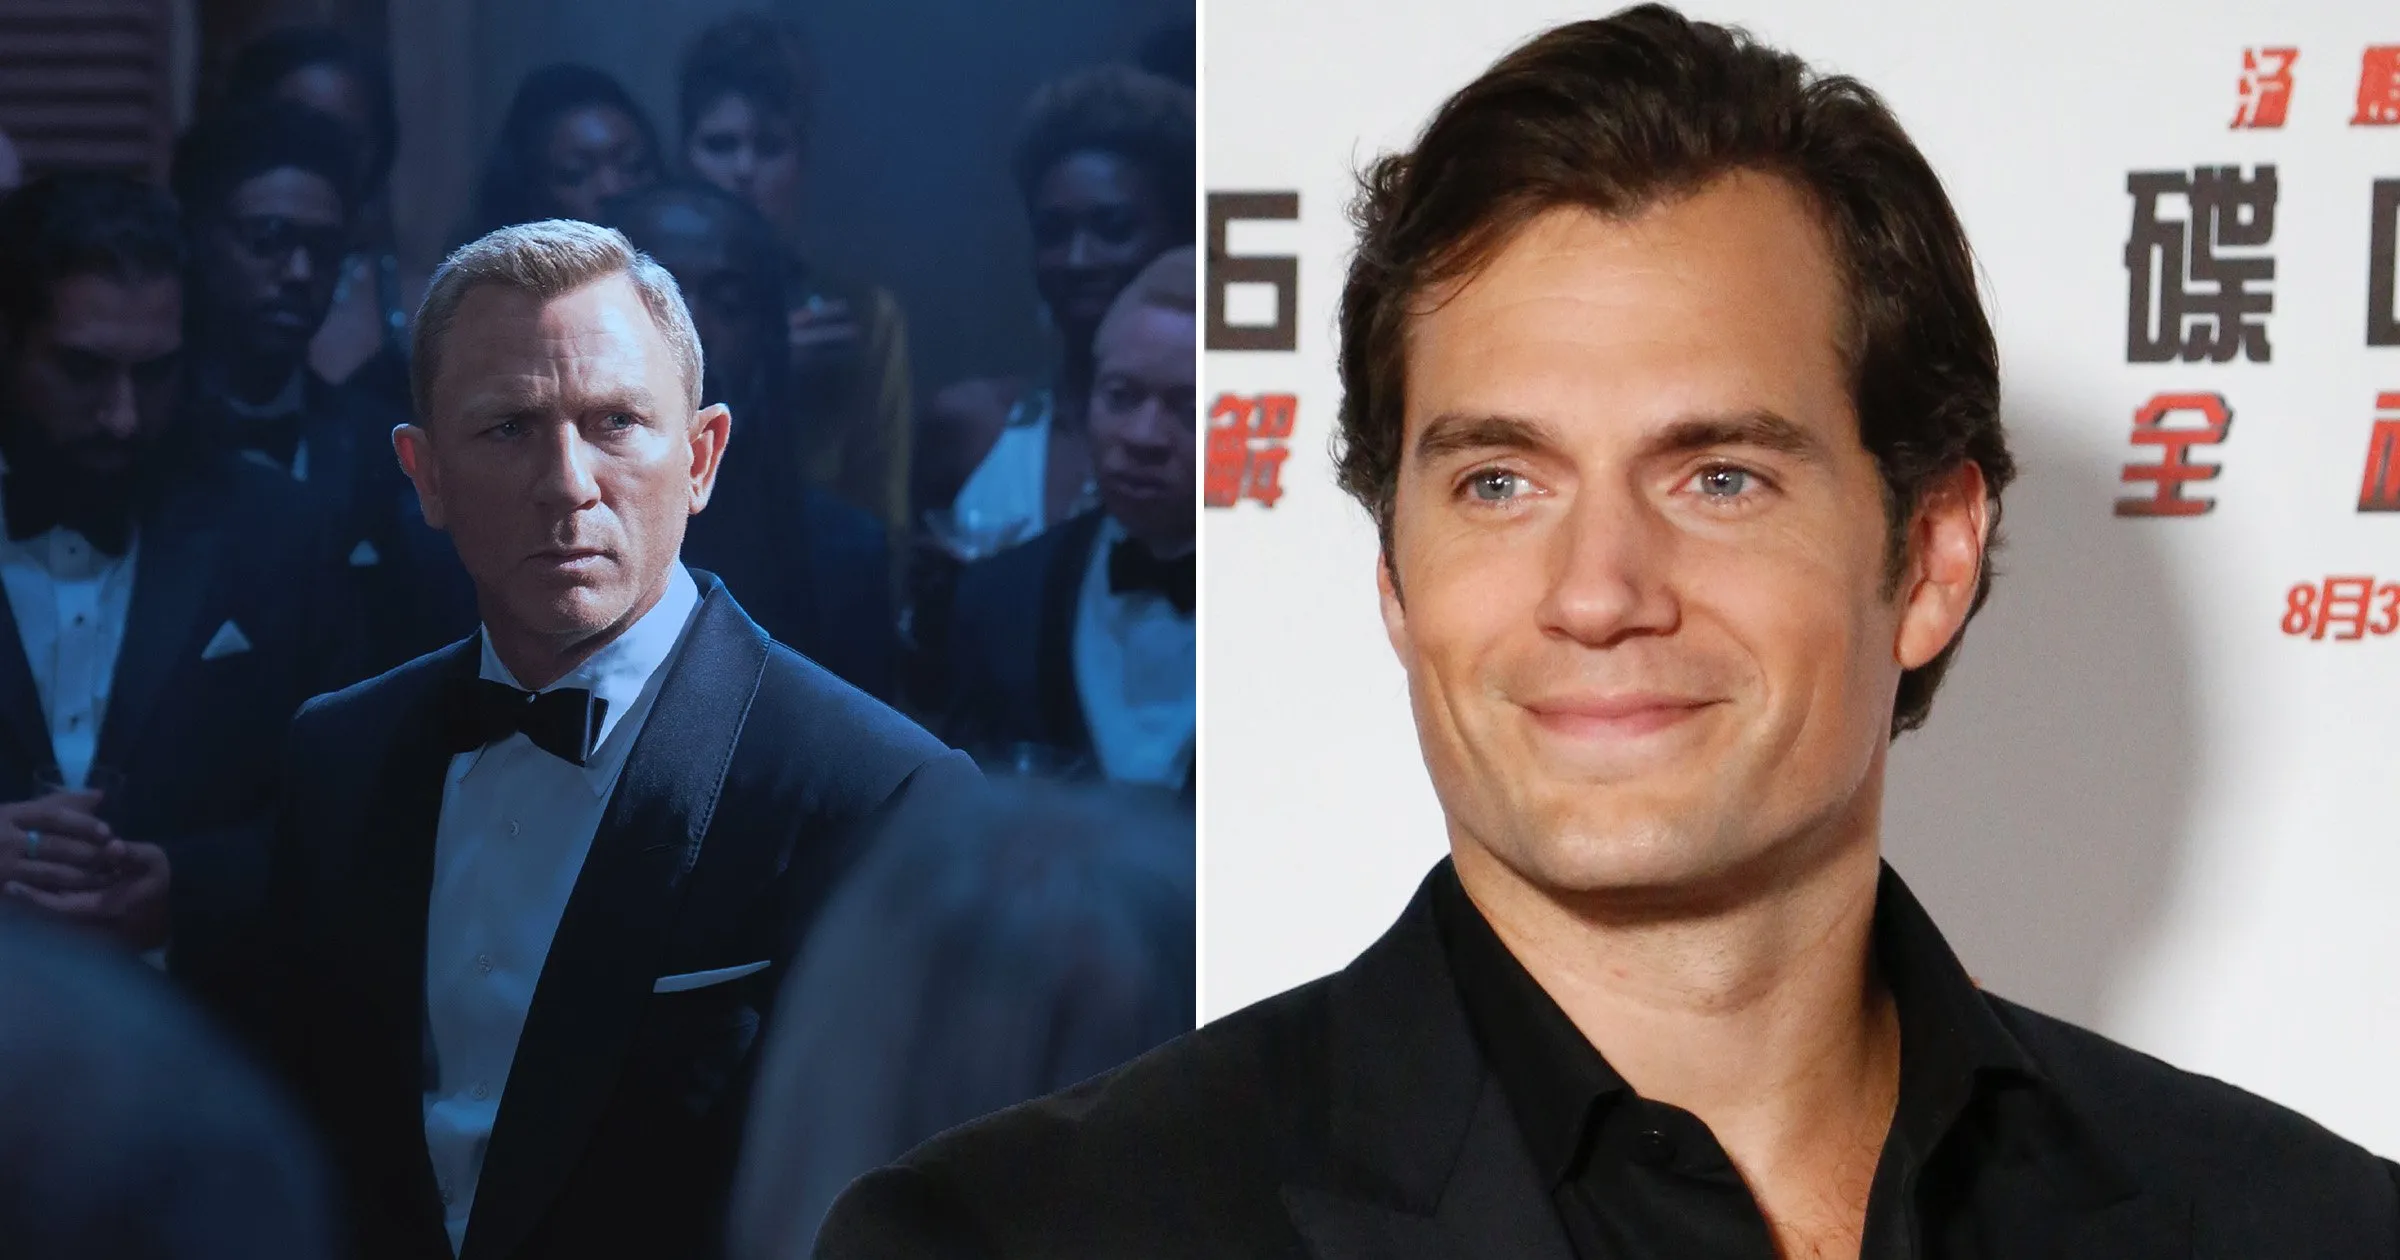 Henry Cavill's Ongoing Desire to Play James Bond: Actor Sees Latest Film as a Promising Start